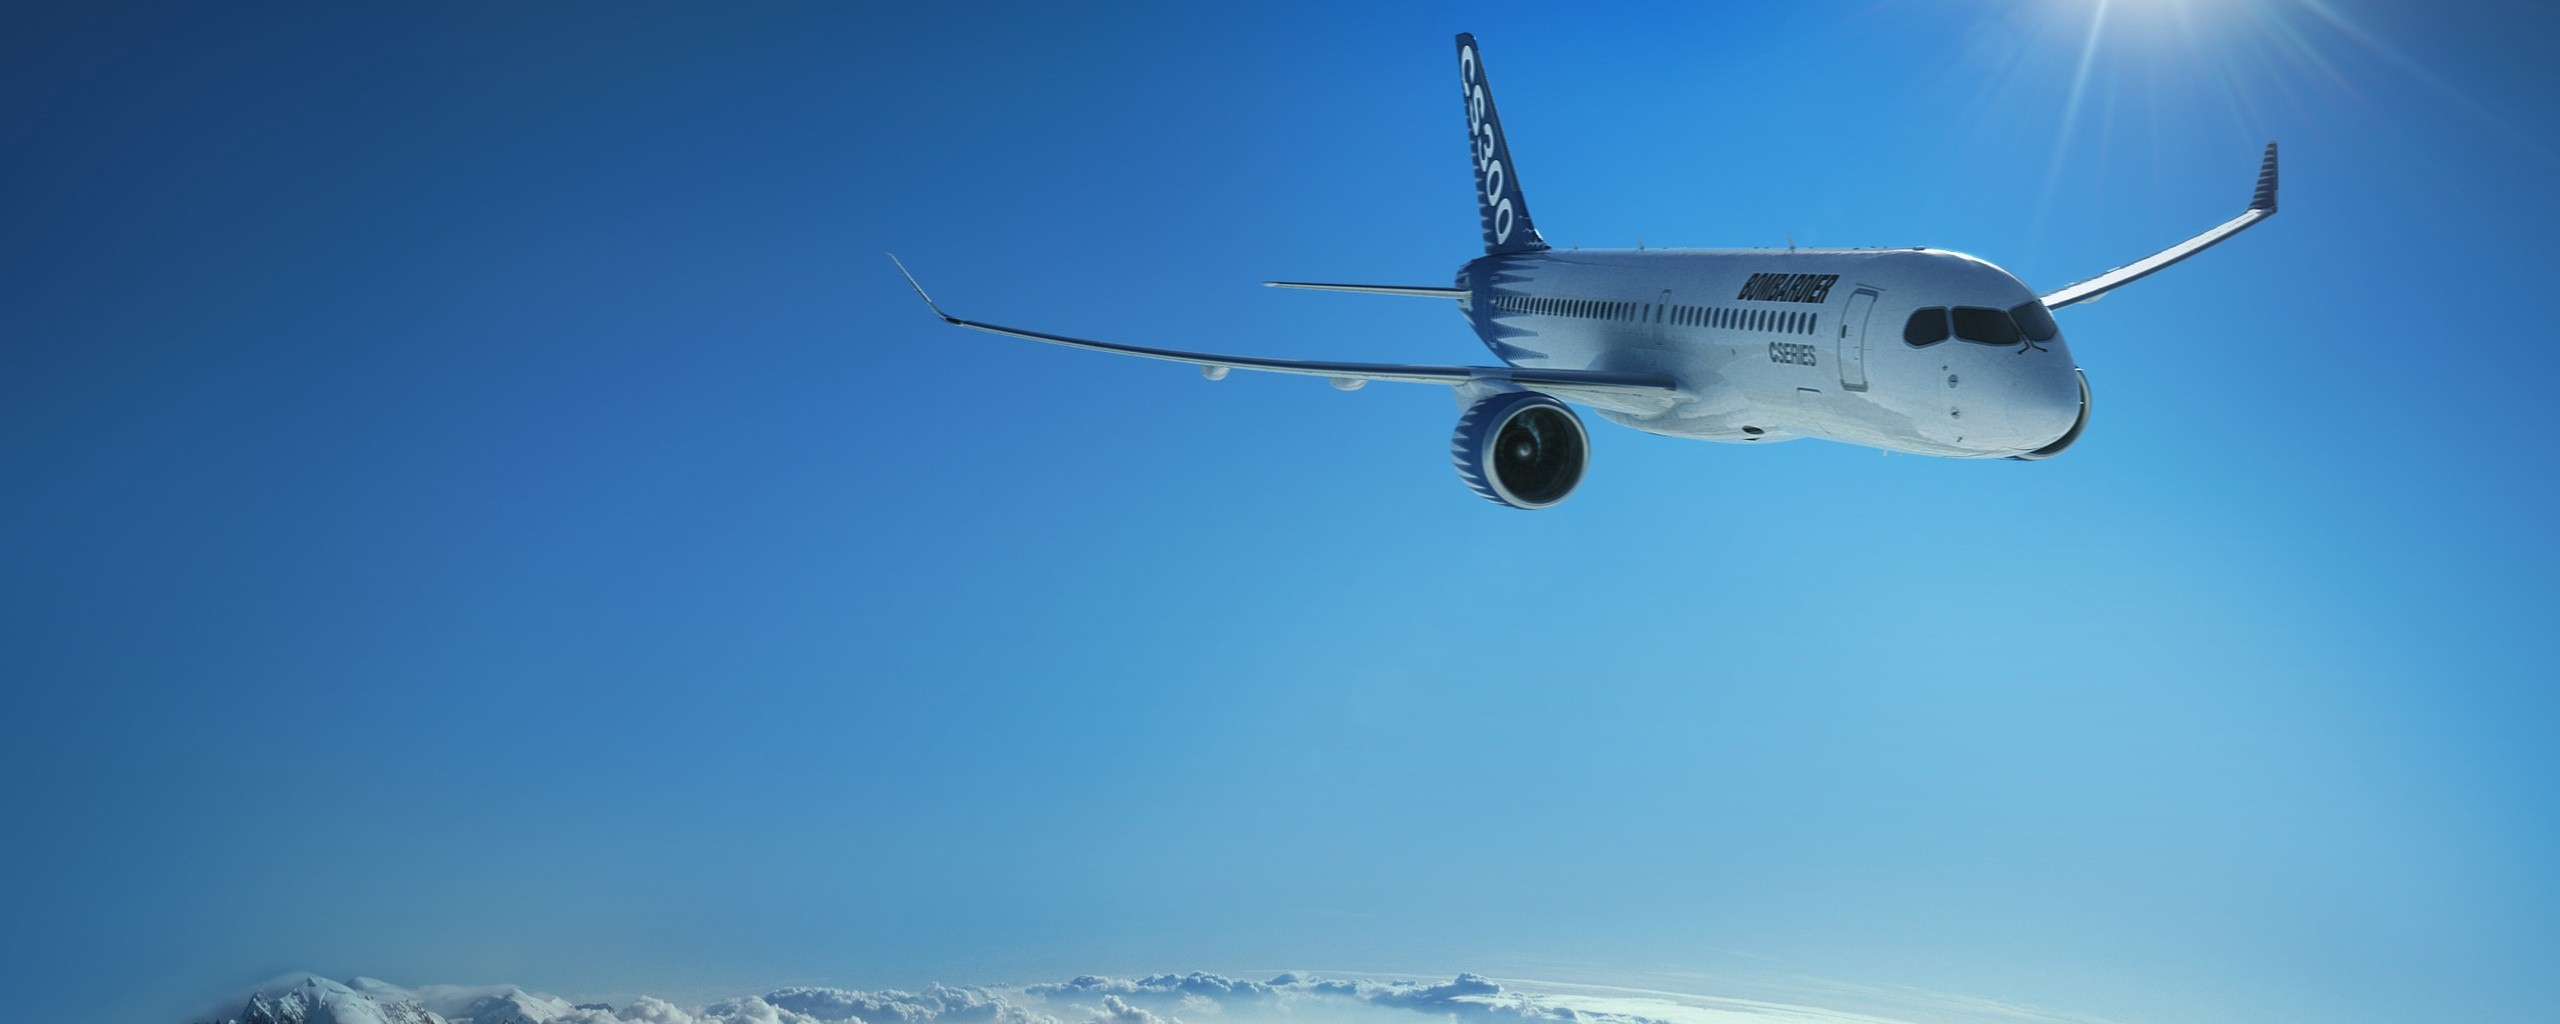 1920x1080  1920x1080 airbus a330 widescreen wallpaper  Coolwallpapersme